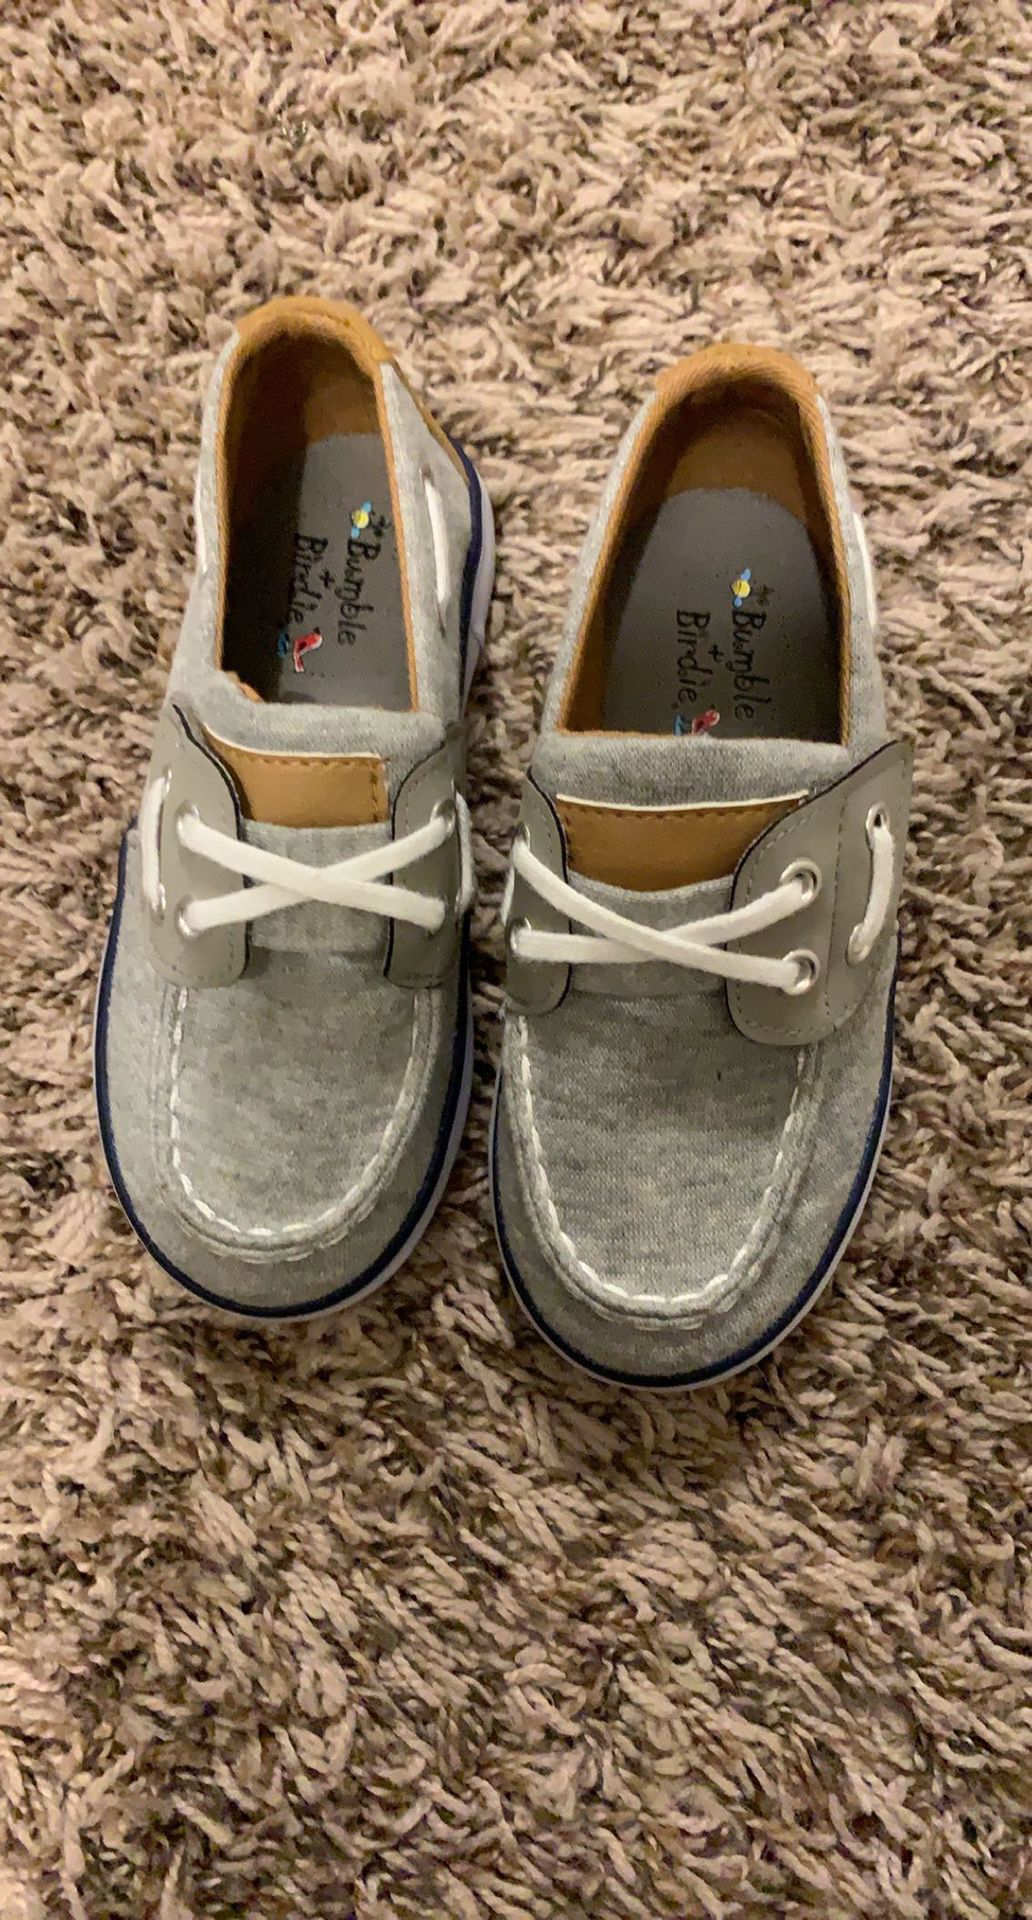 New Toddler Shoes